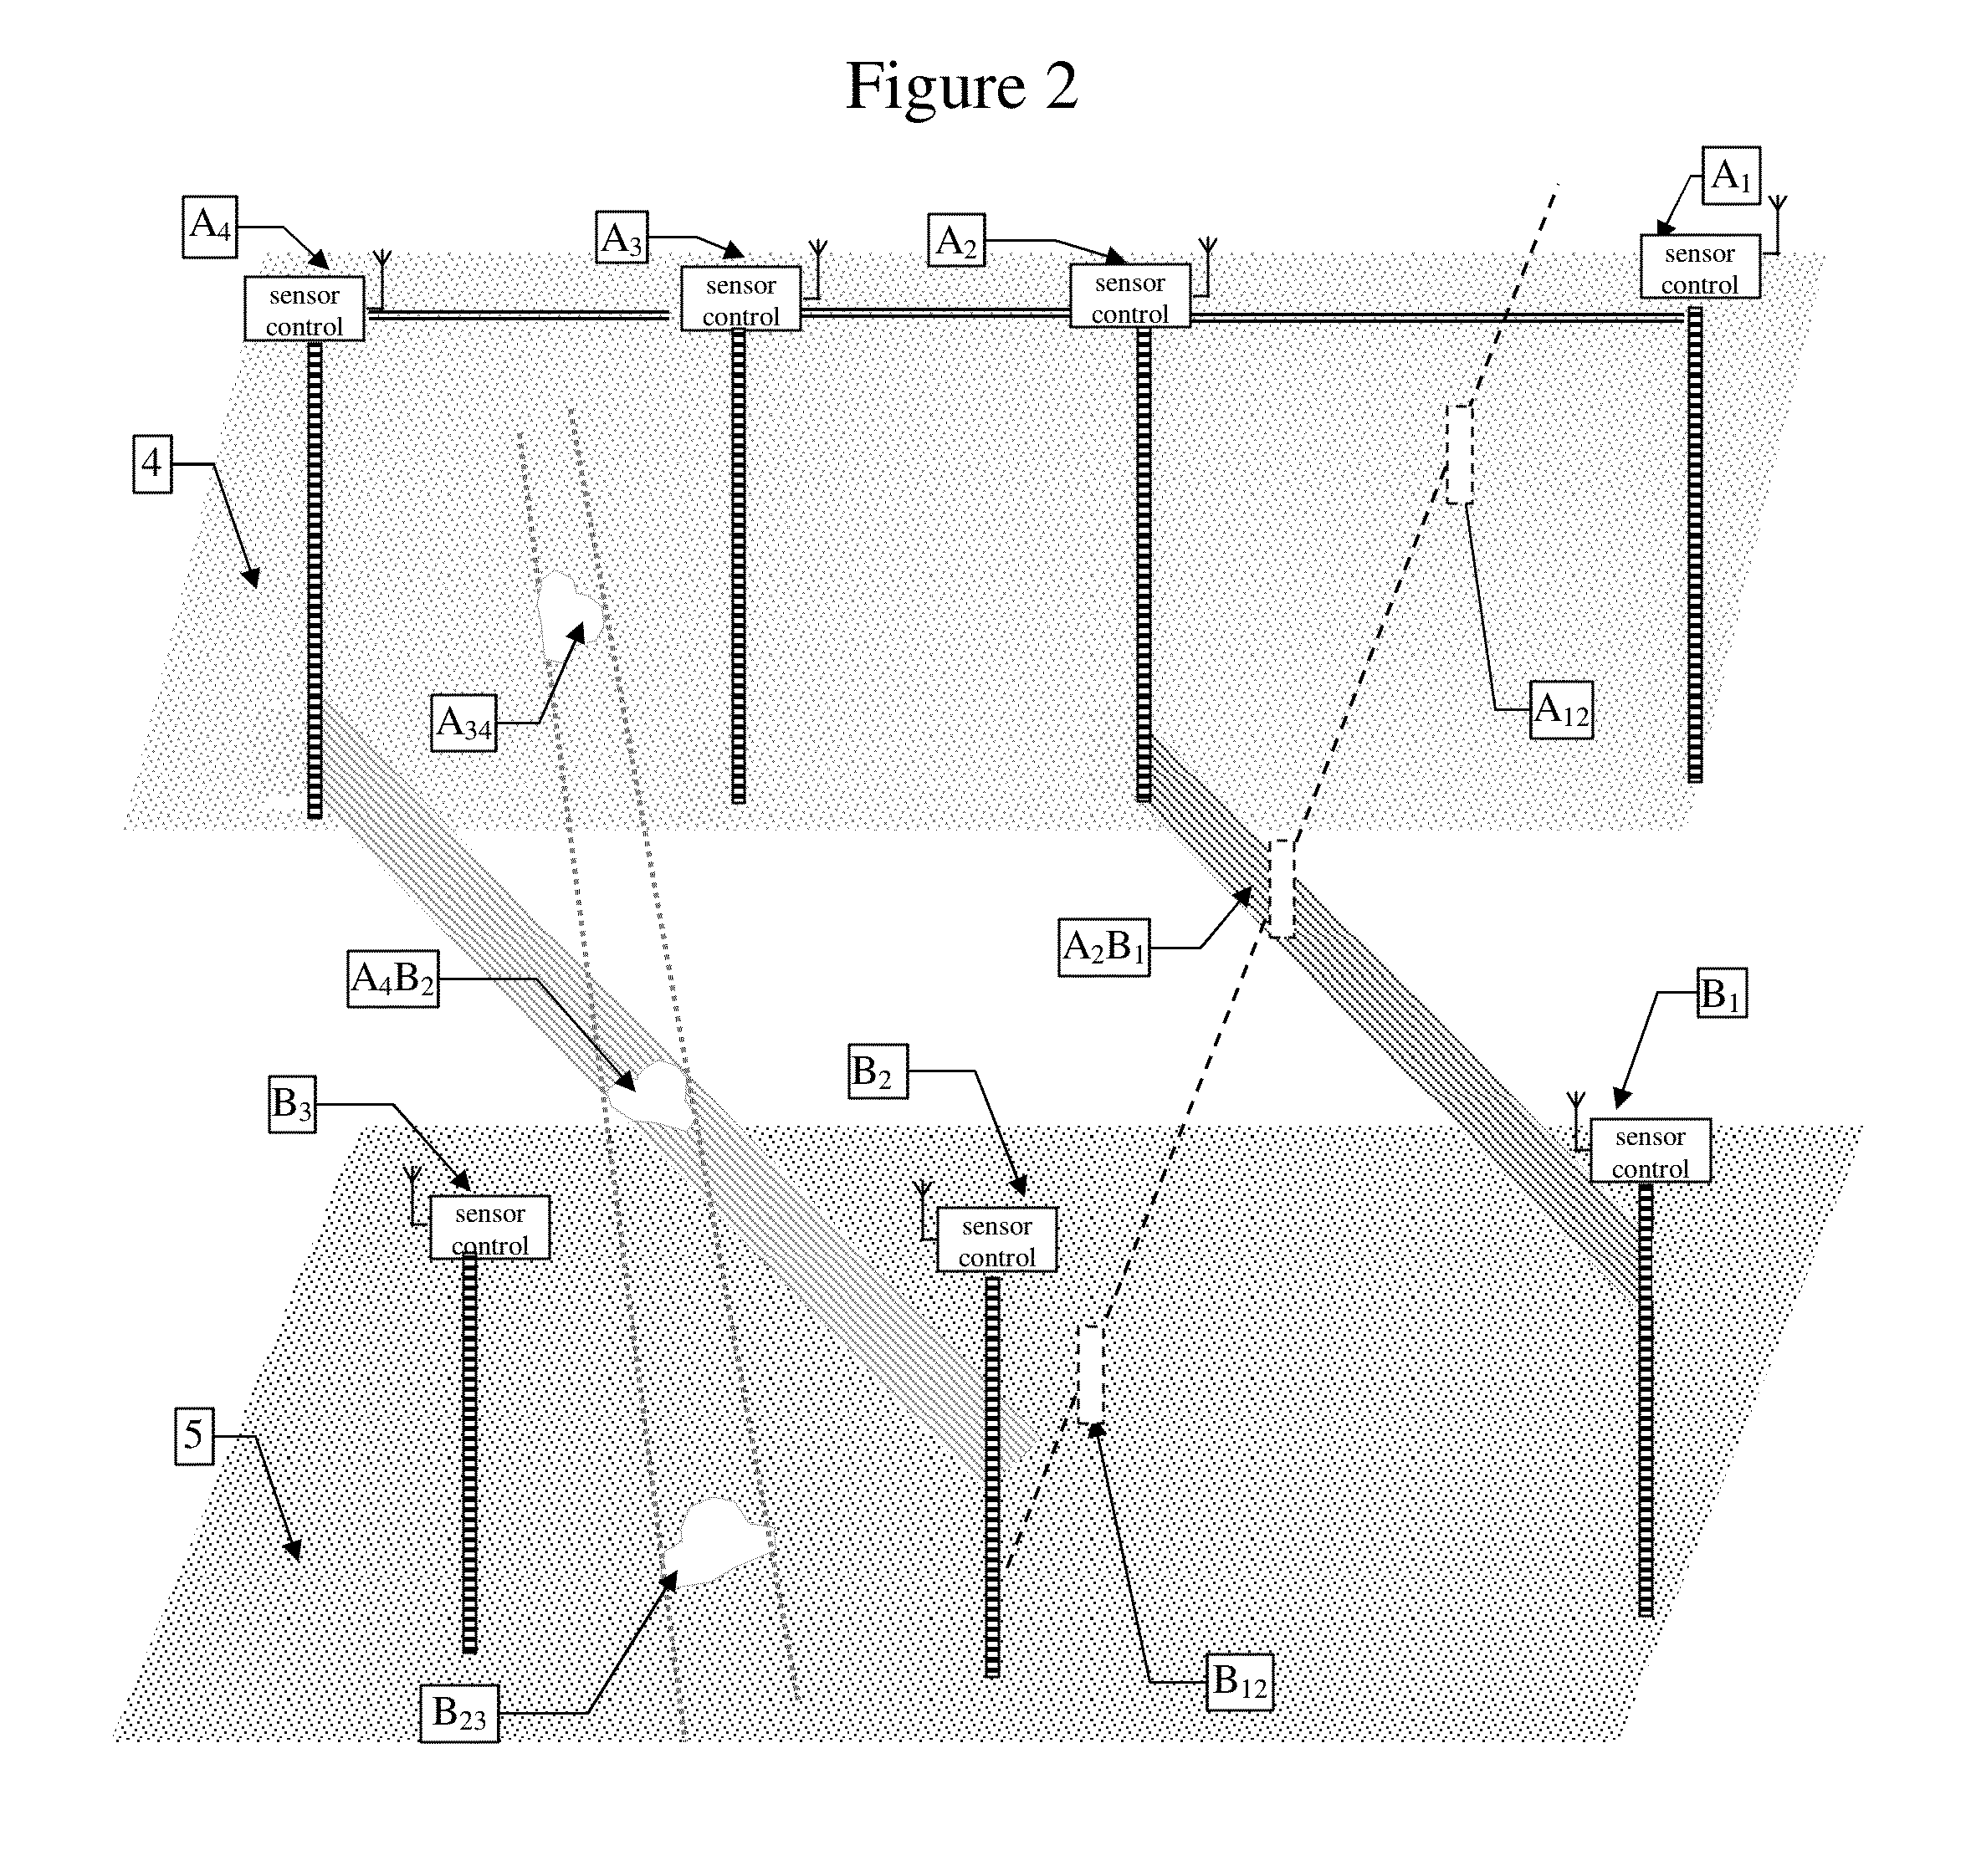 Method and apparatus for mapping the underground soil